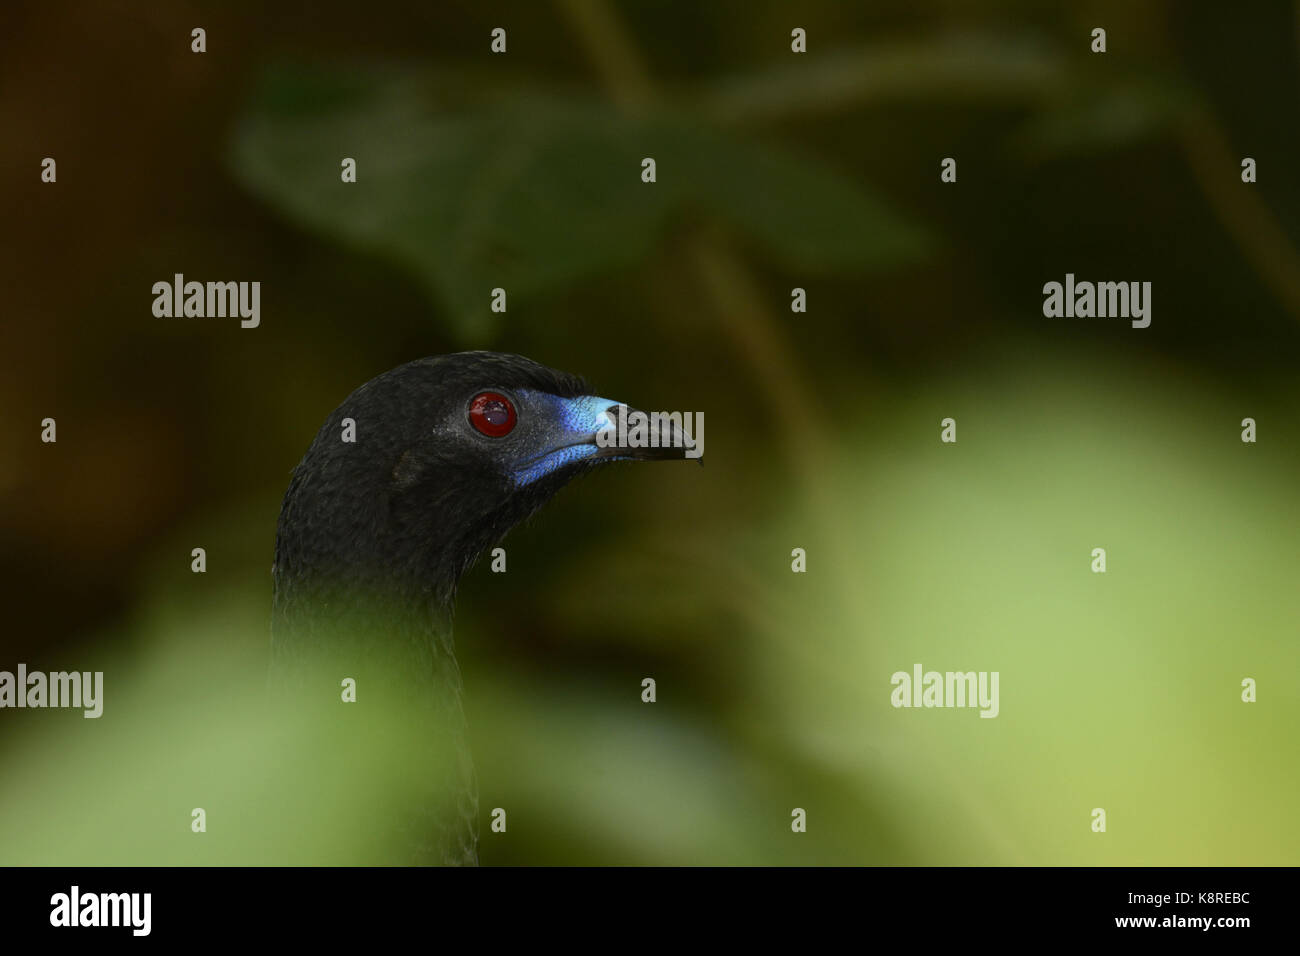 Black Guan (Chamaepetes unicolor) adult hiding behind vegetation, close-up of head, Turrialba, Costa Rica, March Stock Photo